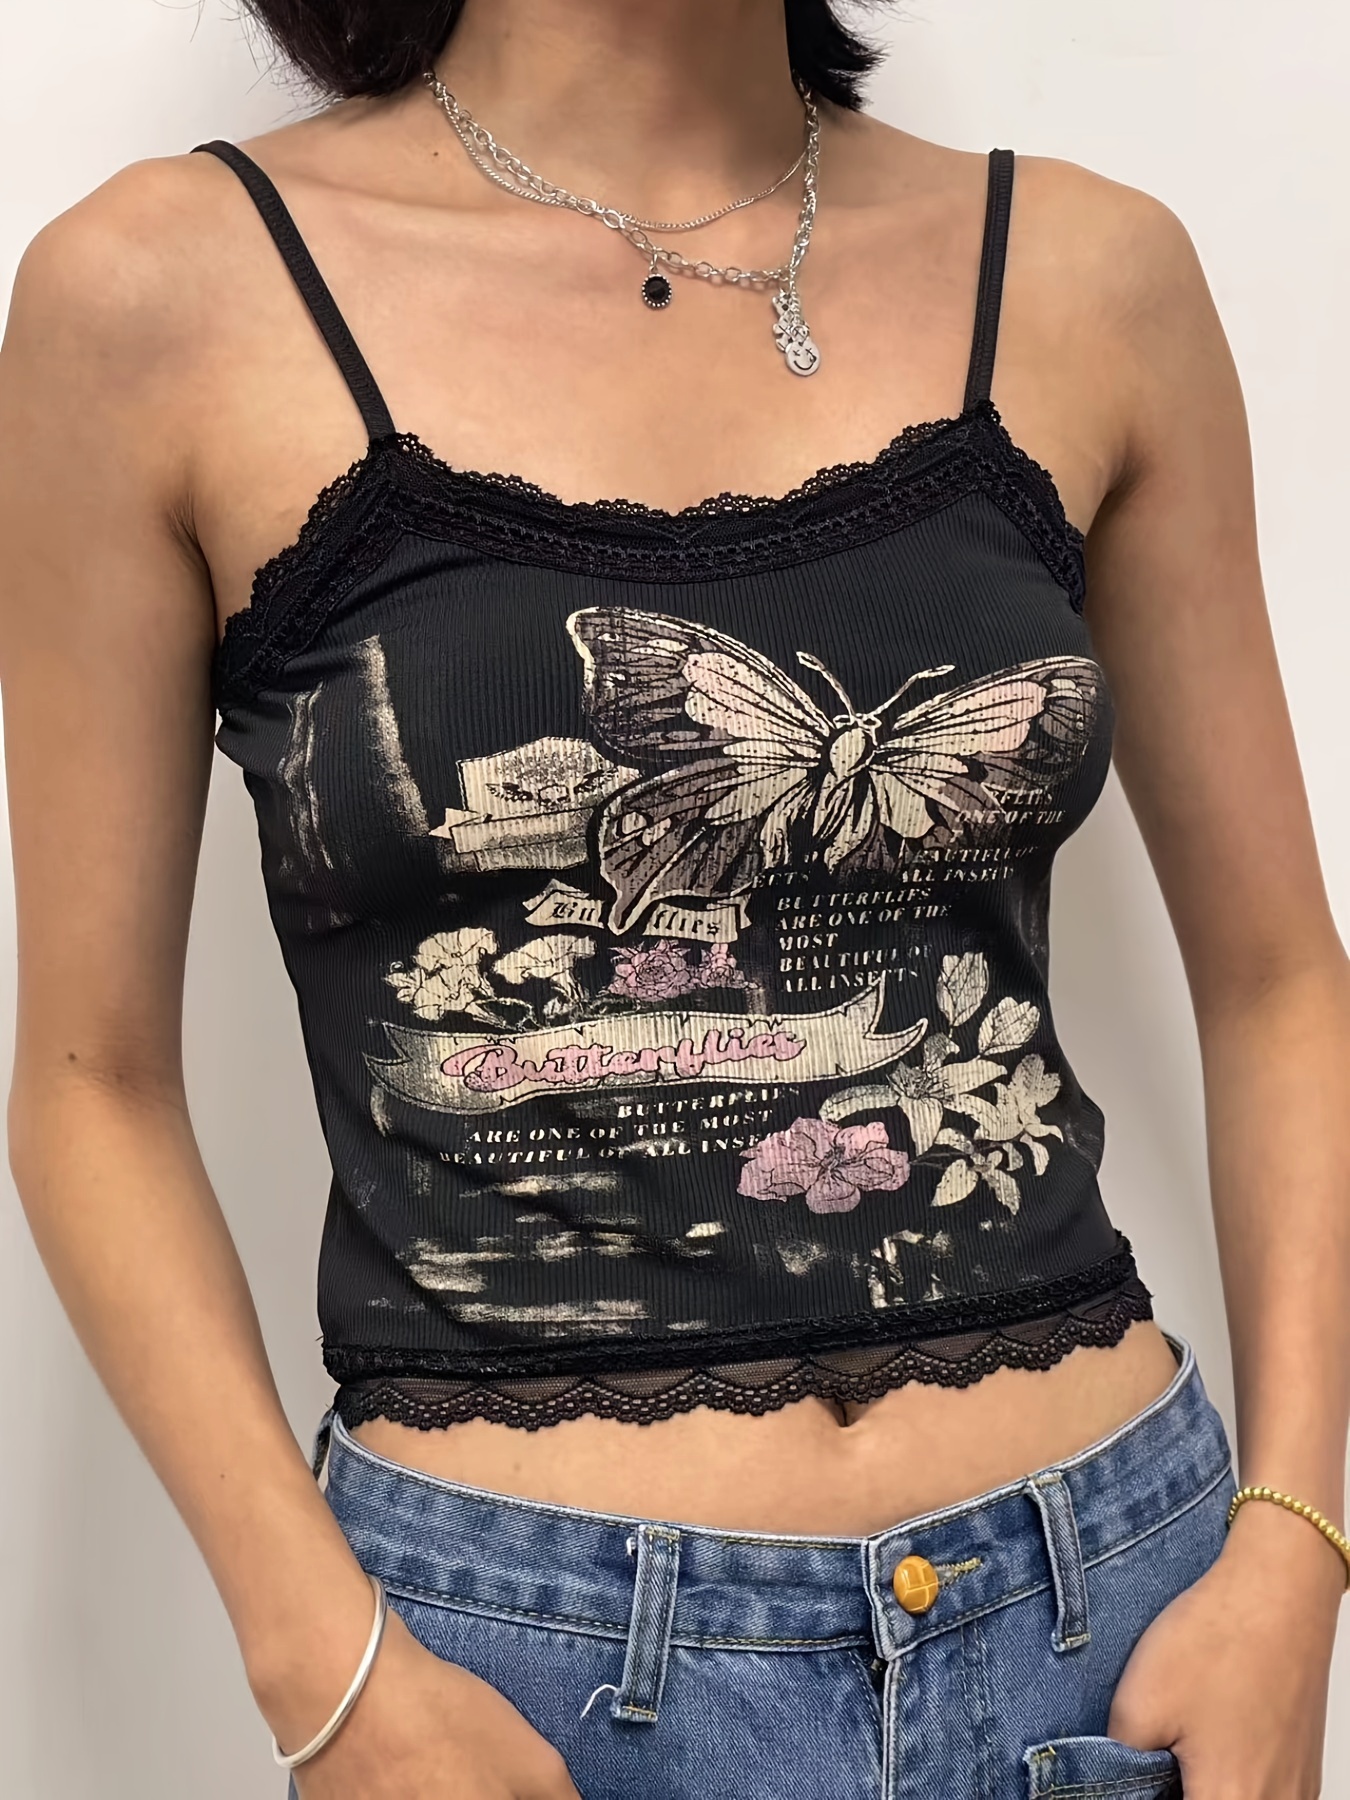 Black Lace Tank Crop Top Sz 4 - A Touch of Camo